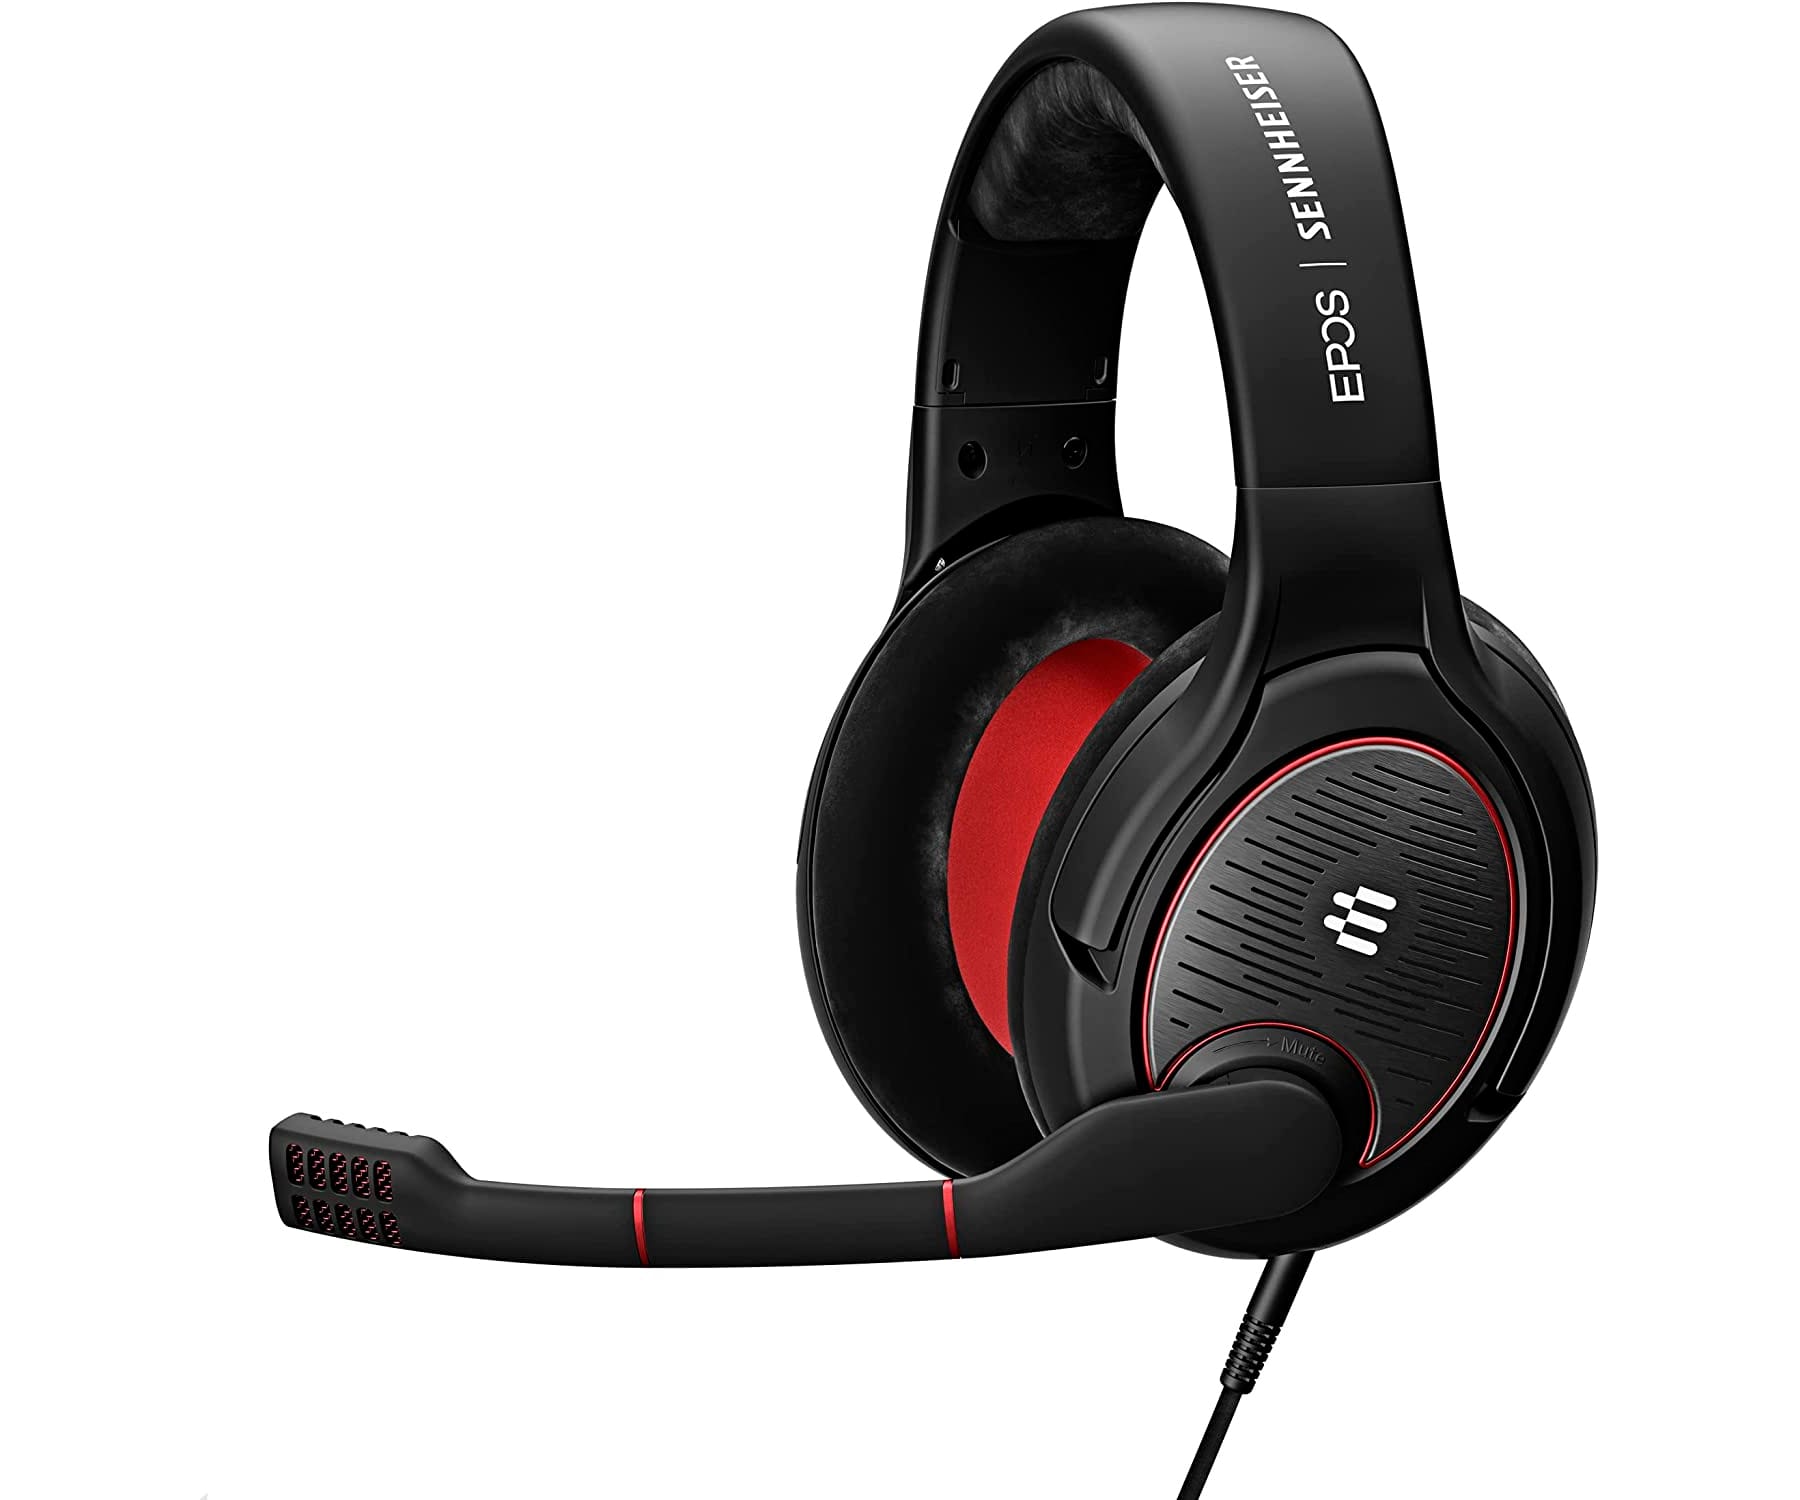 EPOS SENNHEISER Game One Black&Red / Auriculares Gaming OverEar con cable